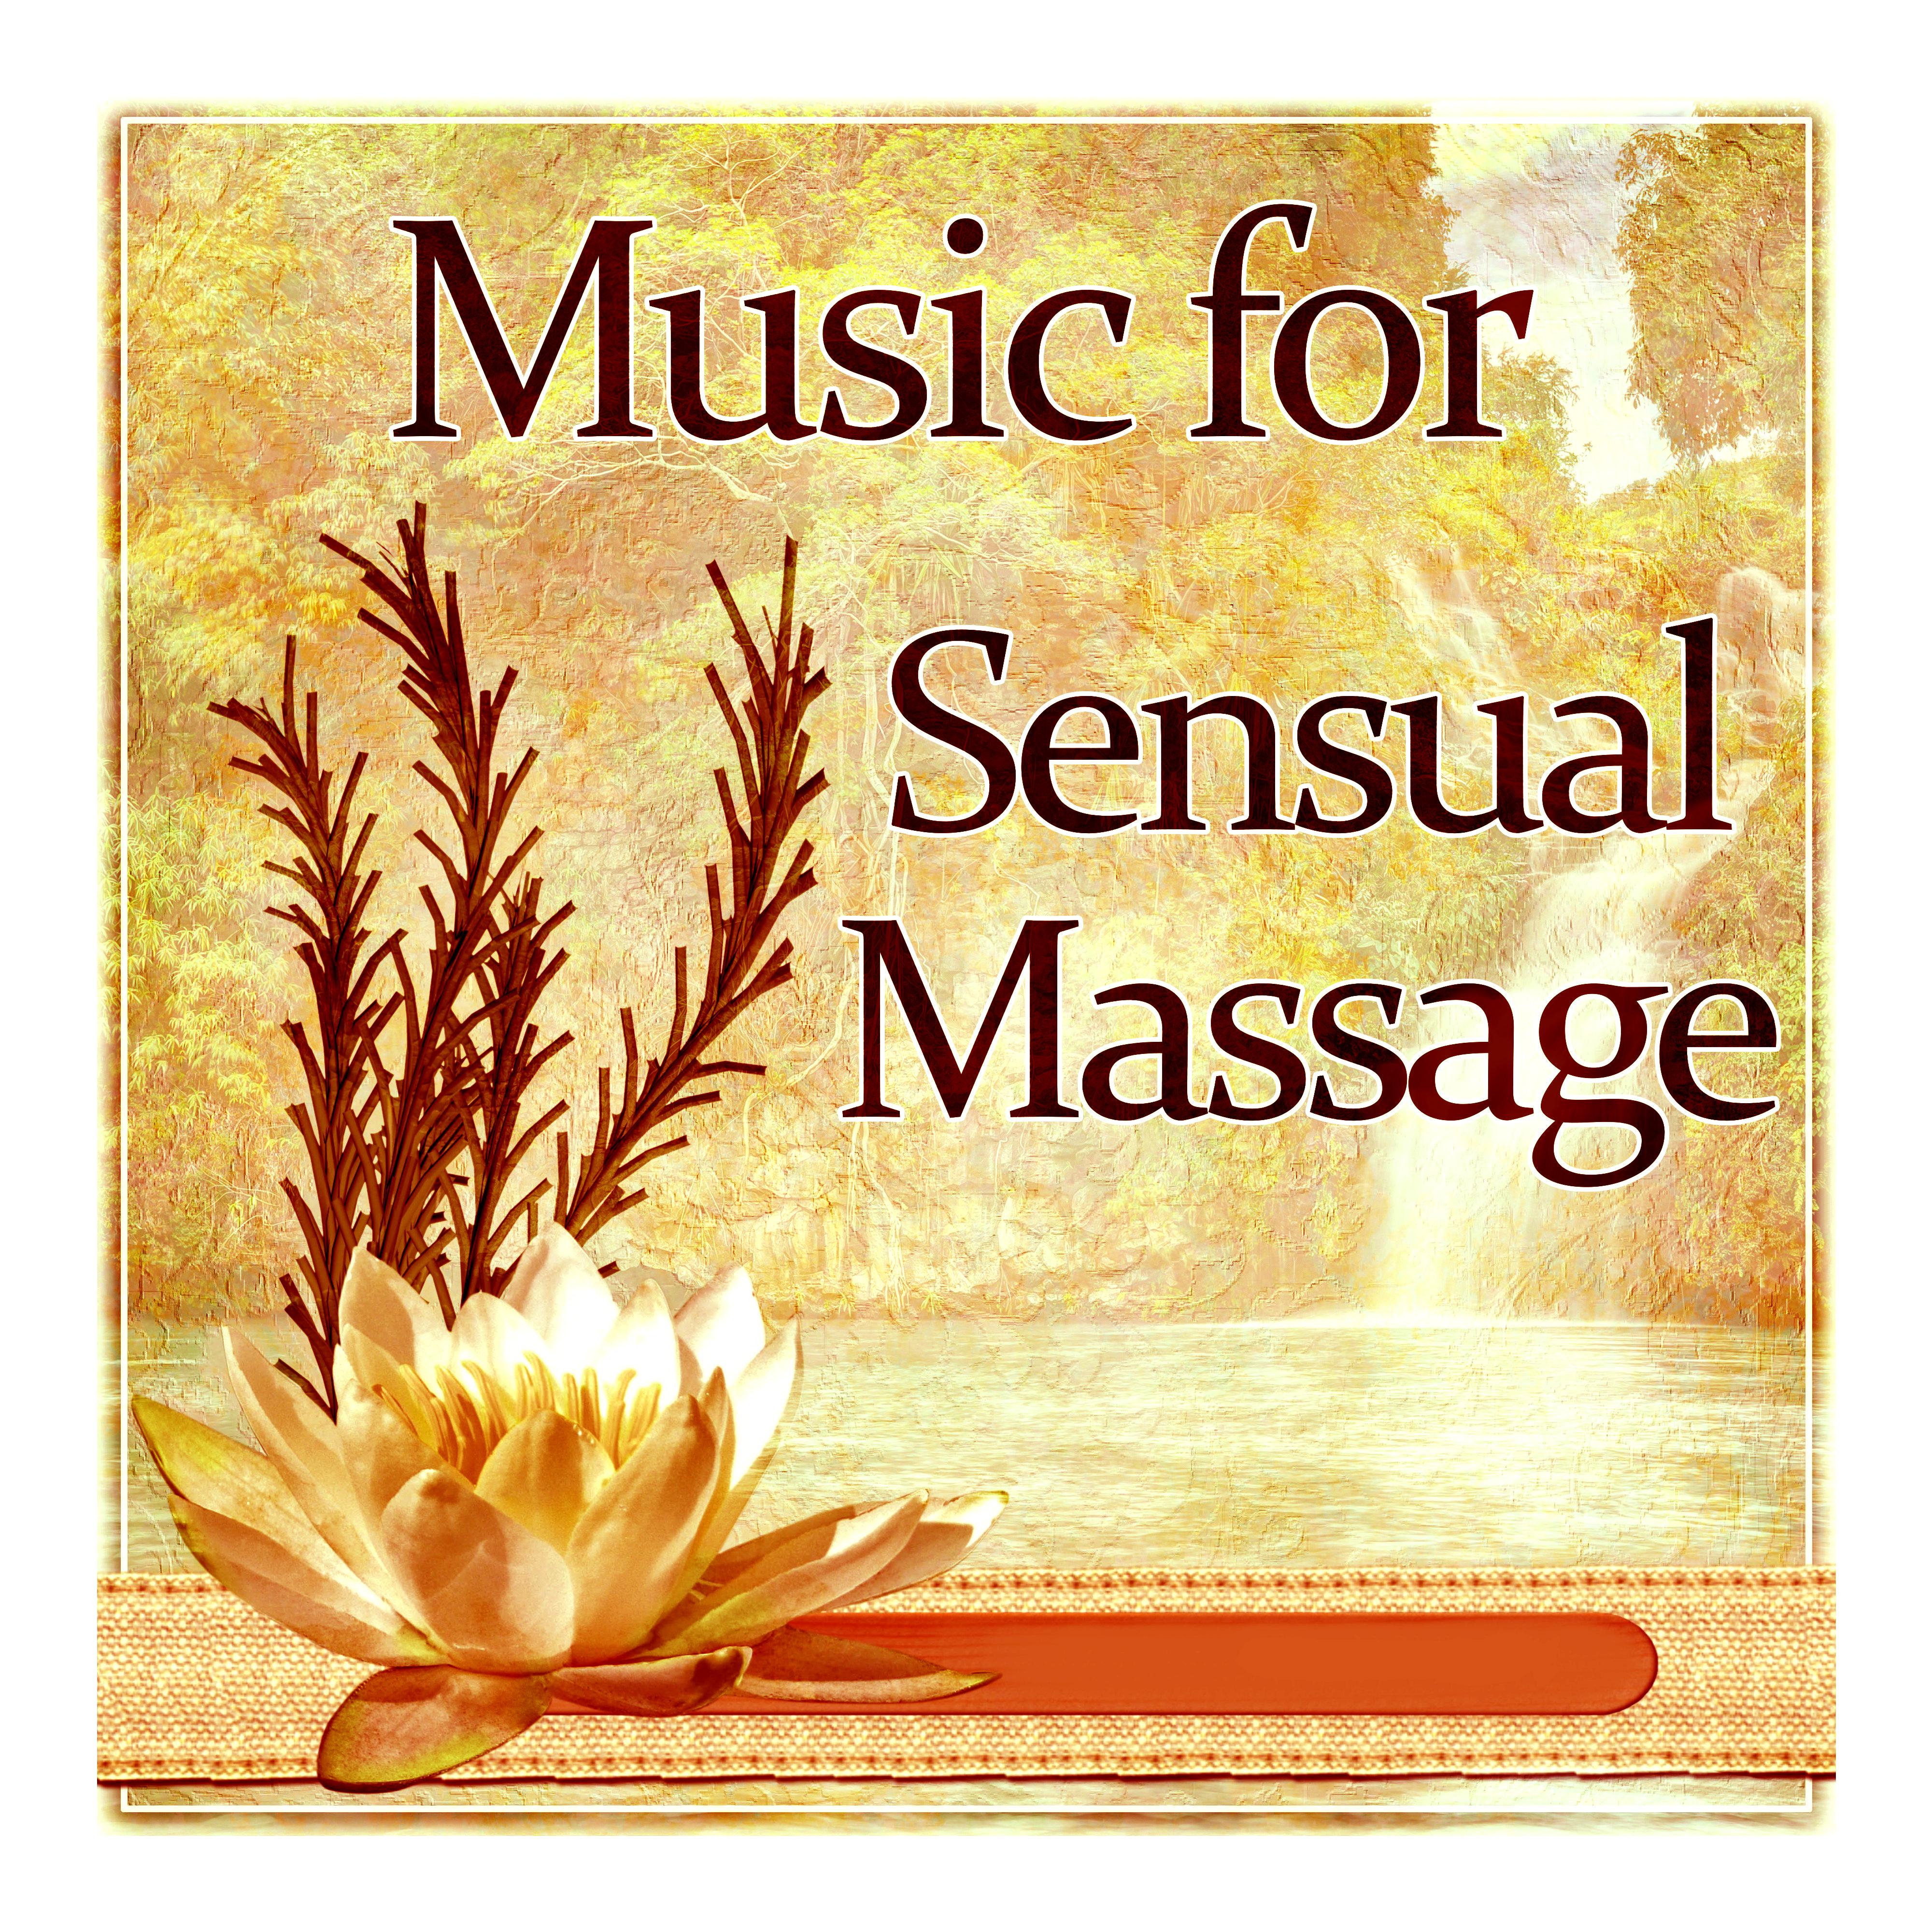 Music for Sensual Massage  Paradise in Spa, New Age, Soothing Music, Calm Music for Relax, Deep Sounds for Massage, Harmony of Senses, Pure Nature Sounds, Stress Relief